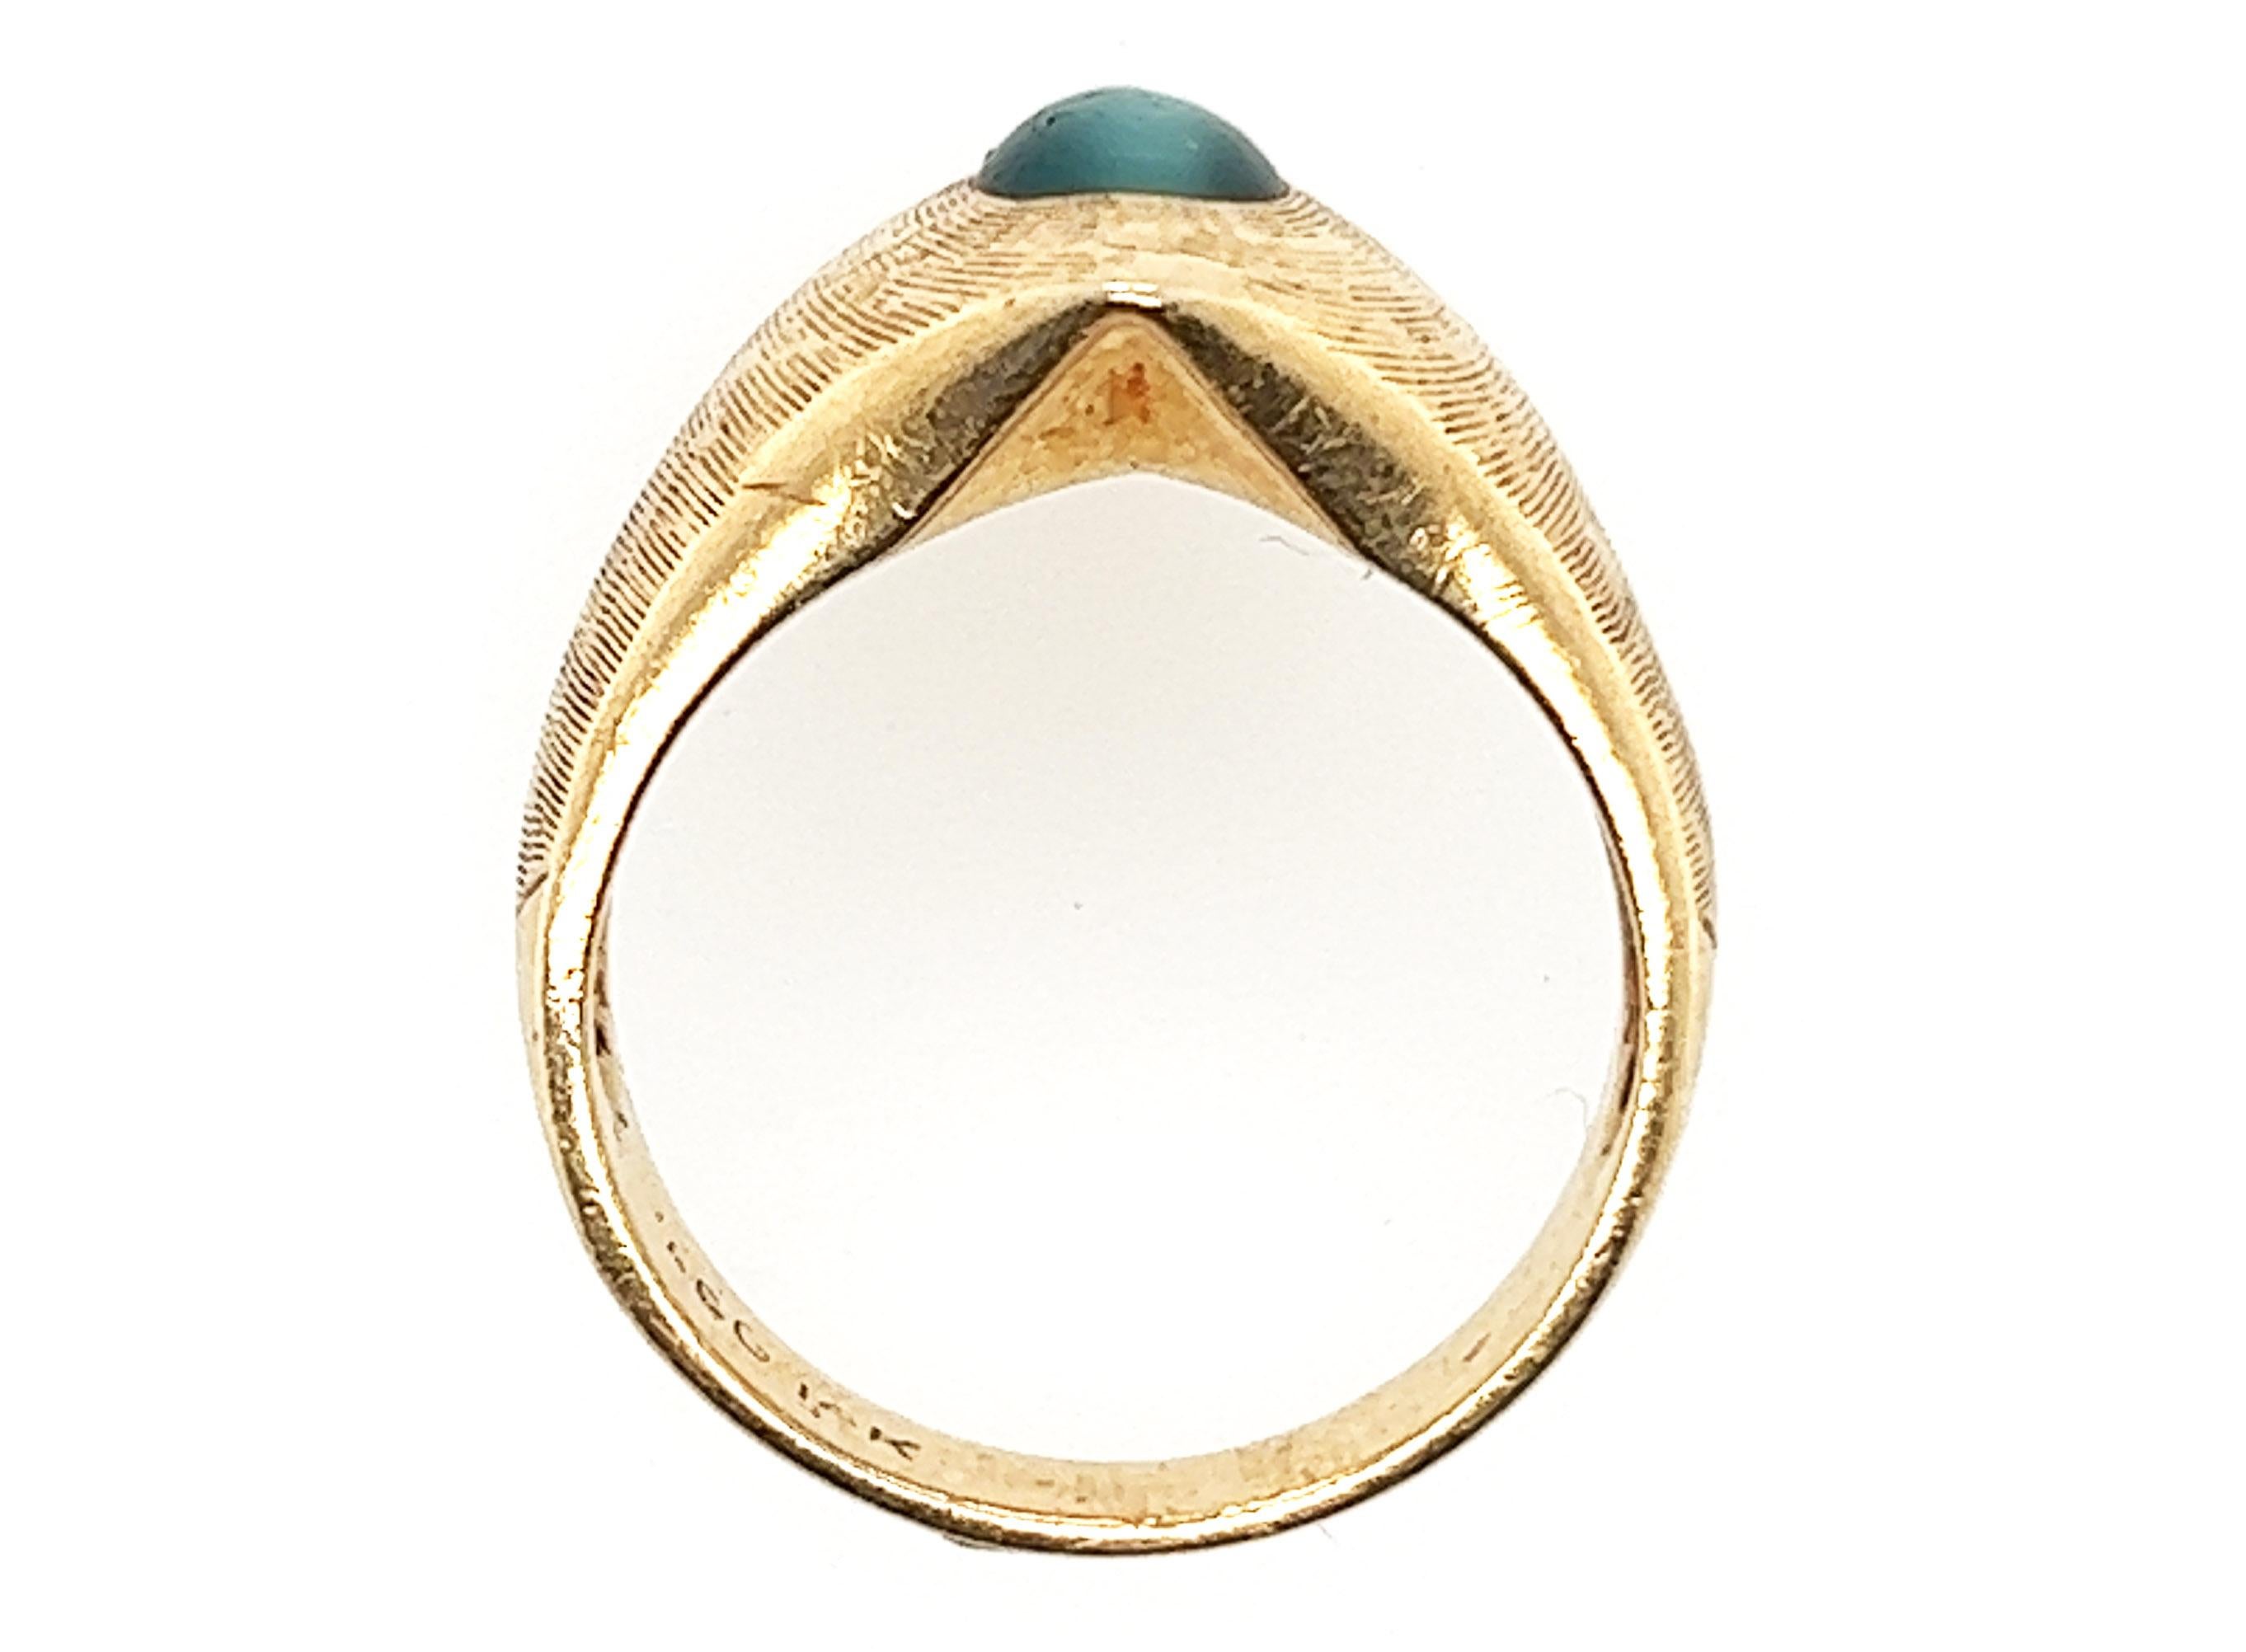 Genuine Original Retro Antique from 1960's GIA Certified Blue Green Tourmaline Cat's Eye Mens Unisex Ring 14K Yellow Gold


Features a Genuine Natural GIA Certified Greenish Blue Oval Cabochon Cat's Eye Tourmaline Gemstone

Tourmaline Cat's-Eye is